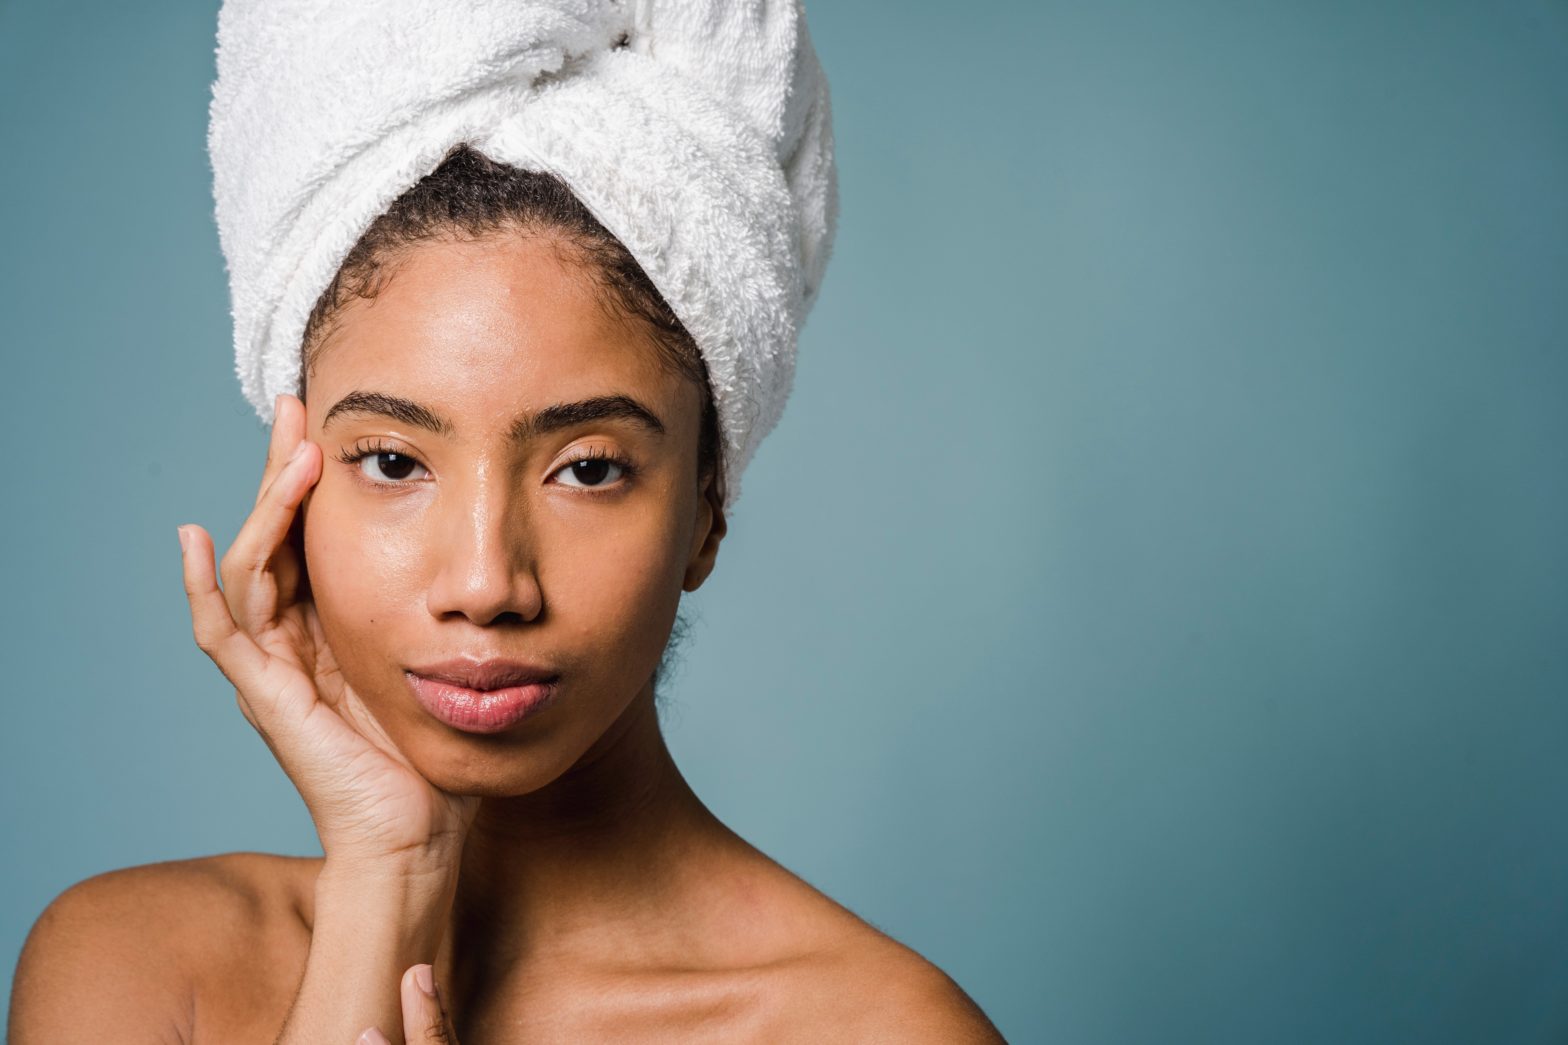 Calm young woman with perfect skin touching face after shower